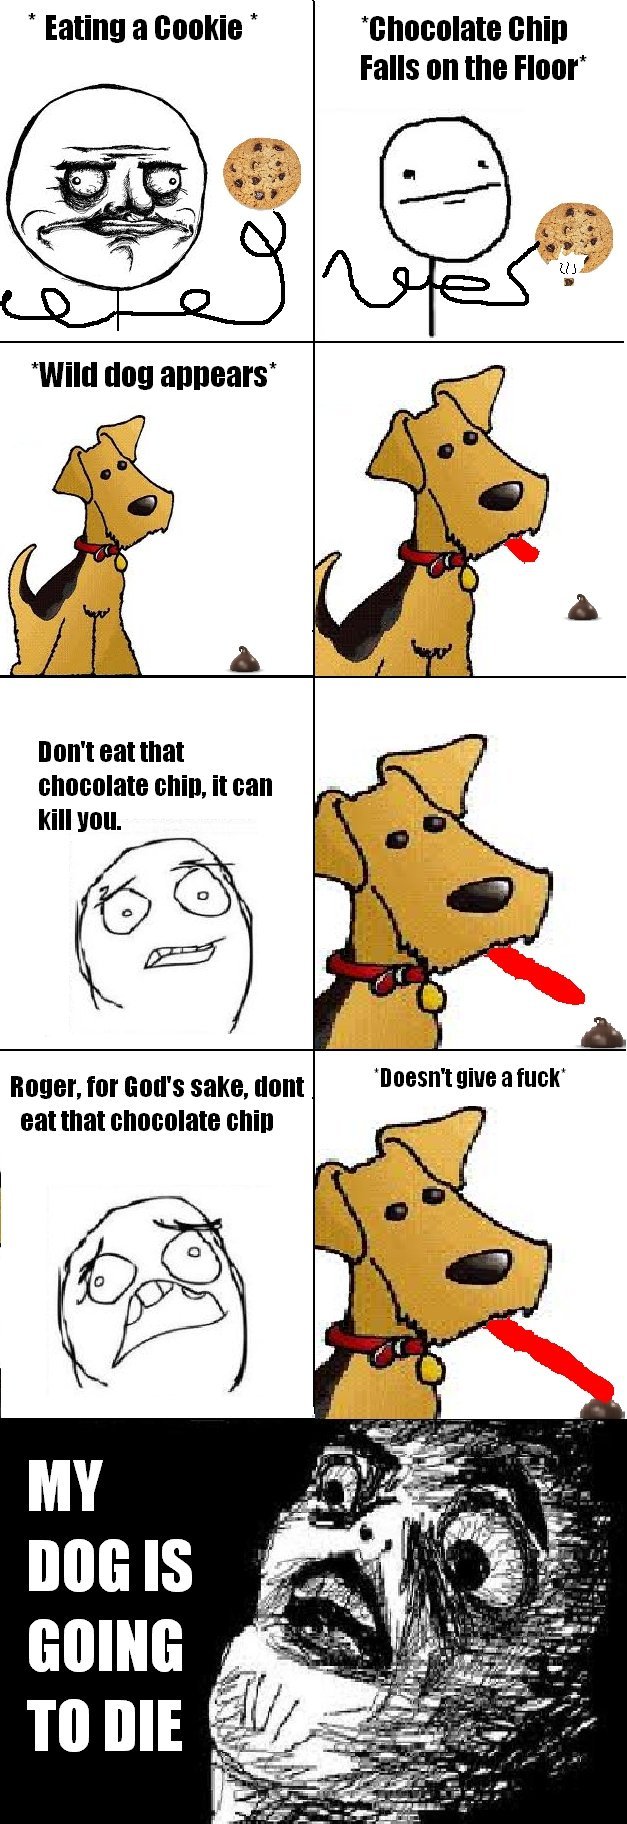 My dog always does this. FABULOUS!. Eating a cookie ' will Falls on the Floor t eat that chocolate Will. it can Kill you eat that chocolate chill '. Can't remember what chemical it is in chocolate that dogs can't eat, but whatever it is it's in most chocolate products. The dogs can't digest the chemical so i